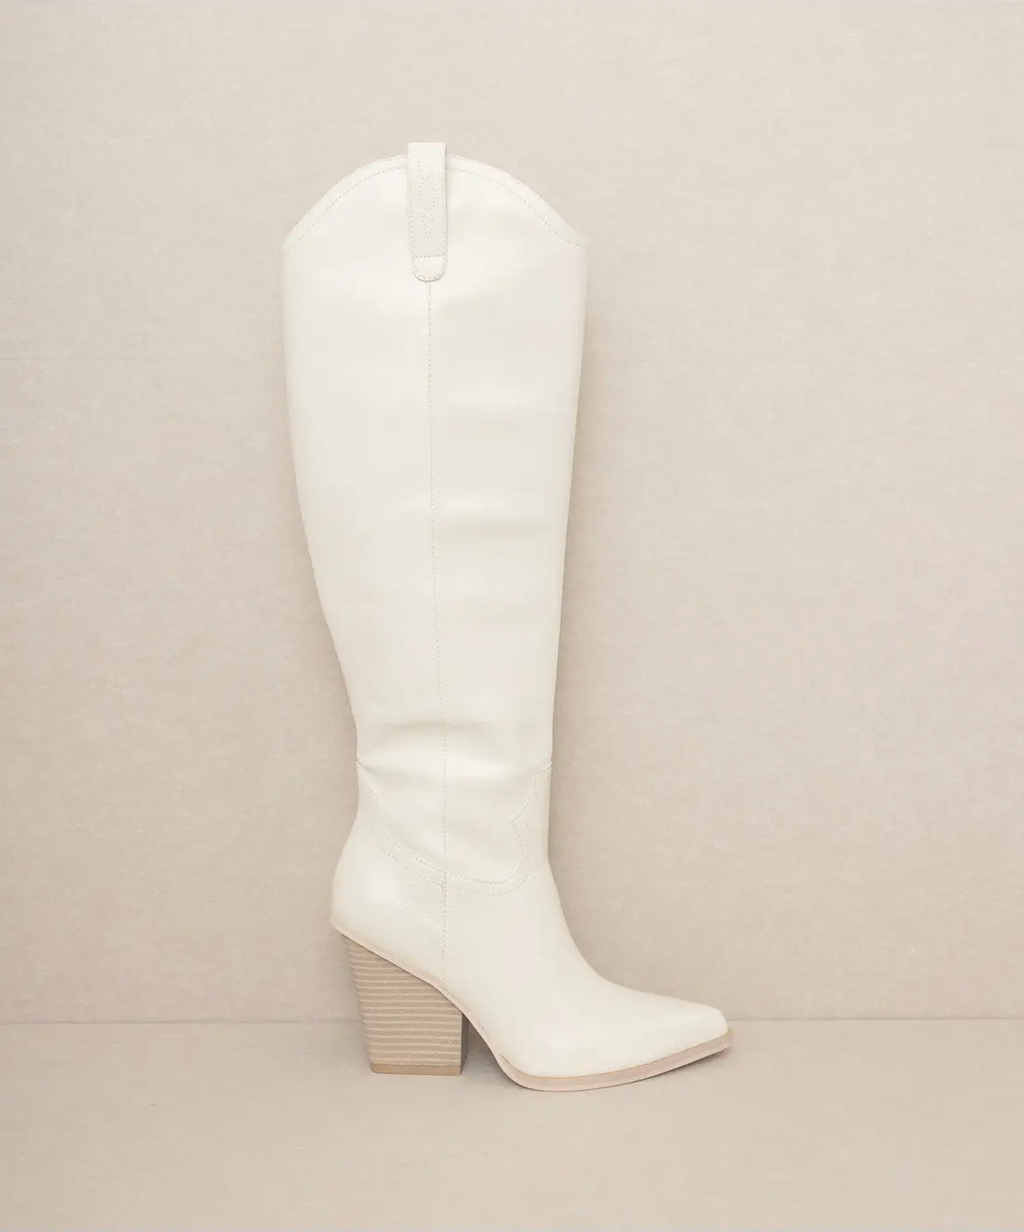 WHITE KNEE HIGH BOOTS